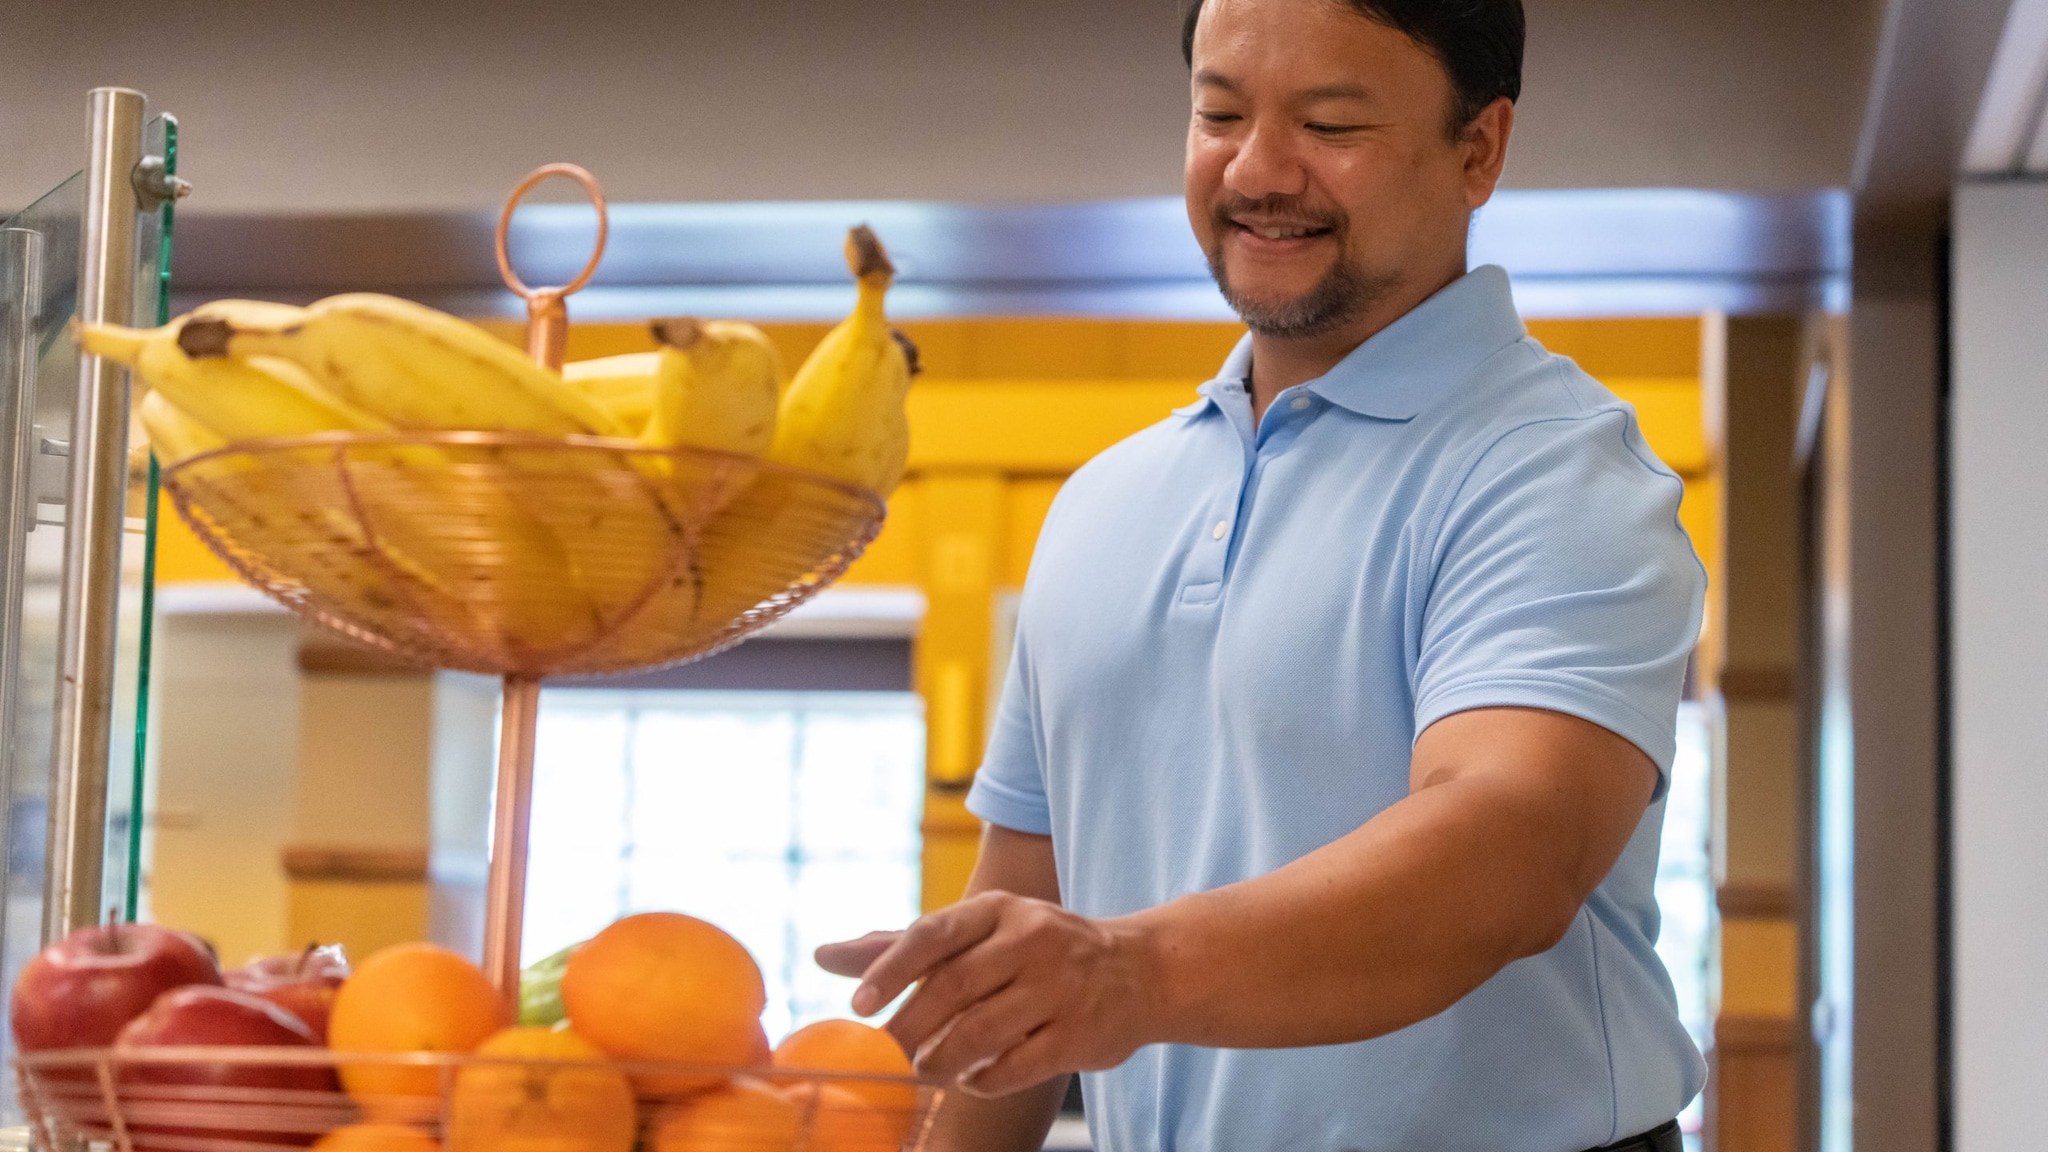 Man reaches for an orange in a display of bananas, apples, and oranges.